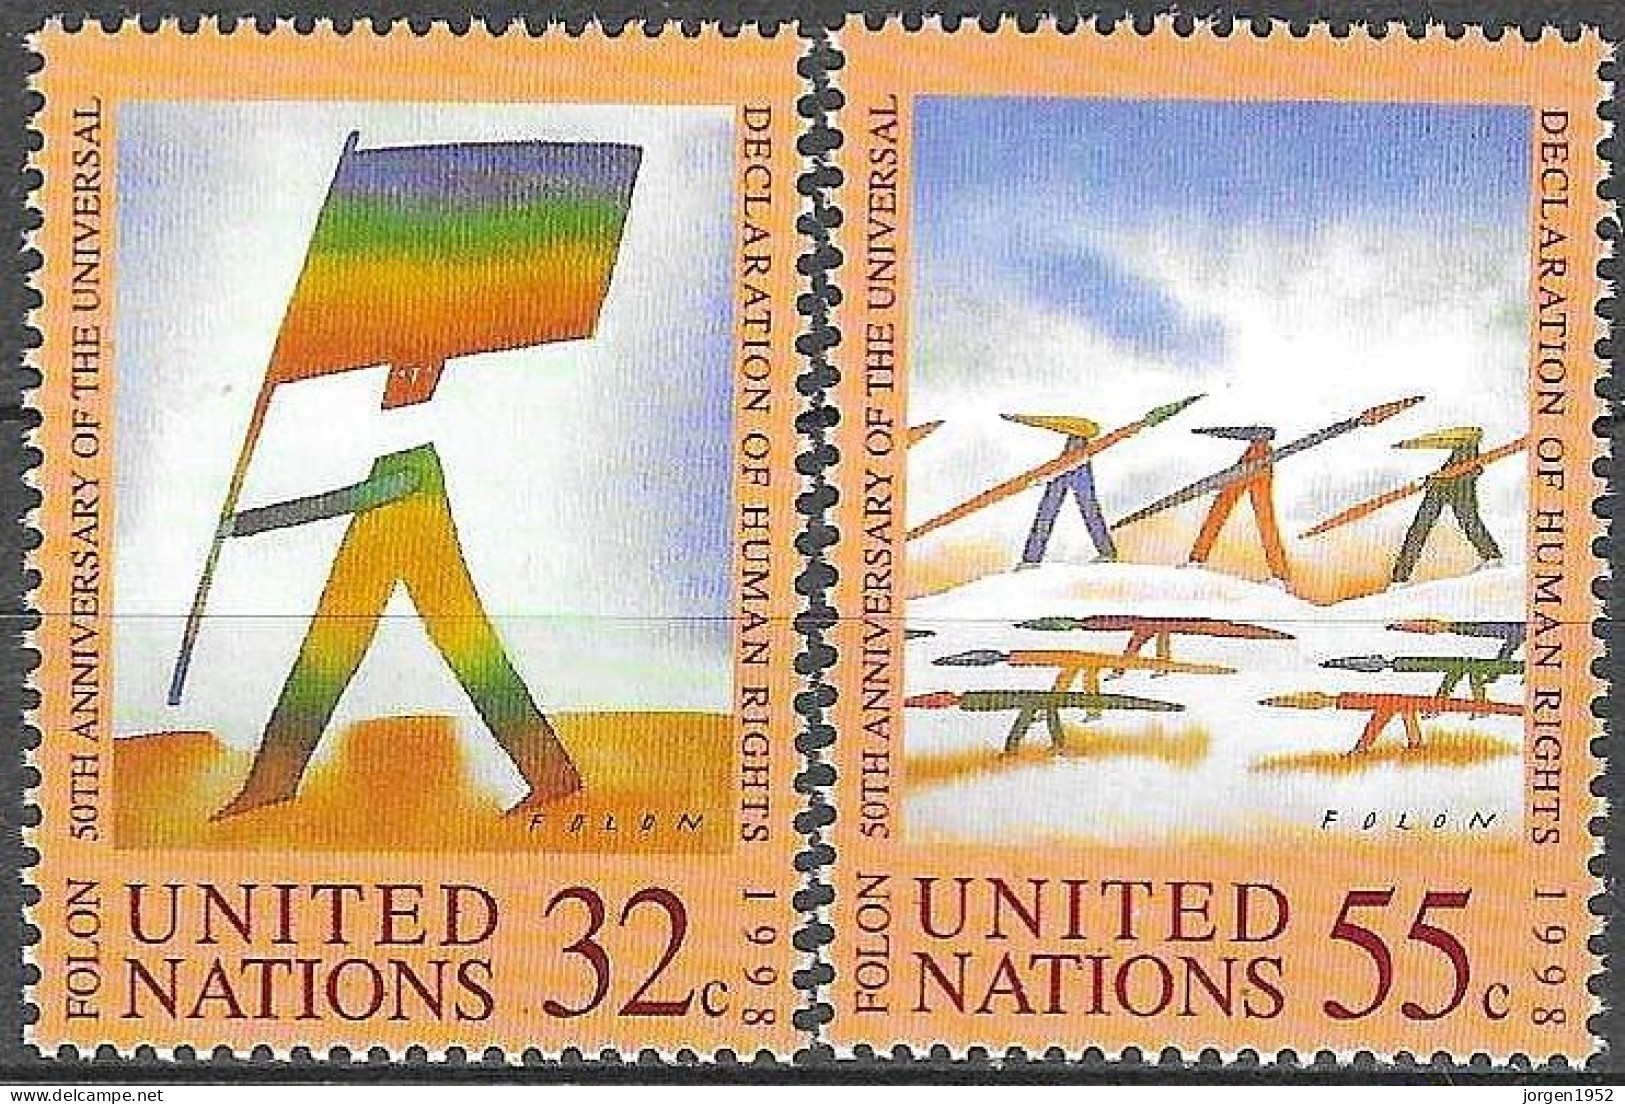 UNITED NATIONS # NEW YORK FROM 1998 STAMPWORLD 787-88** - Neufs